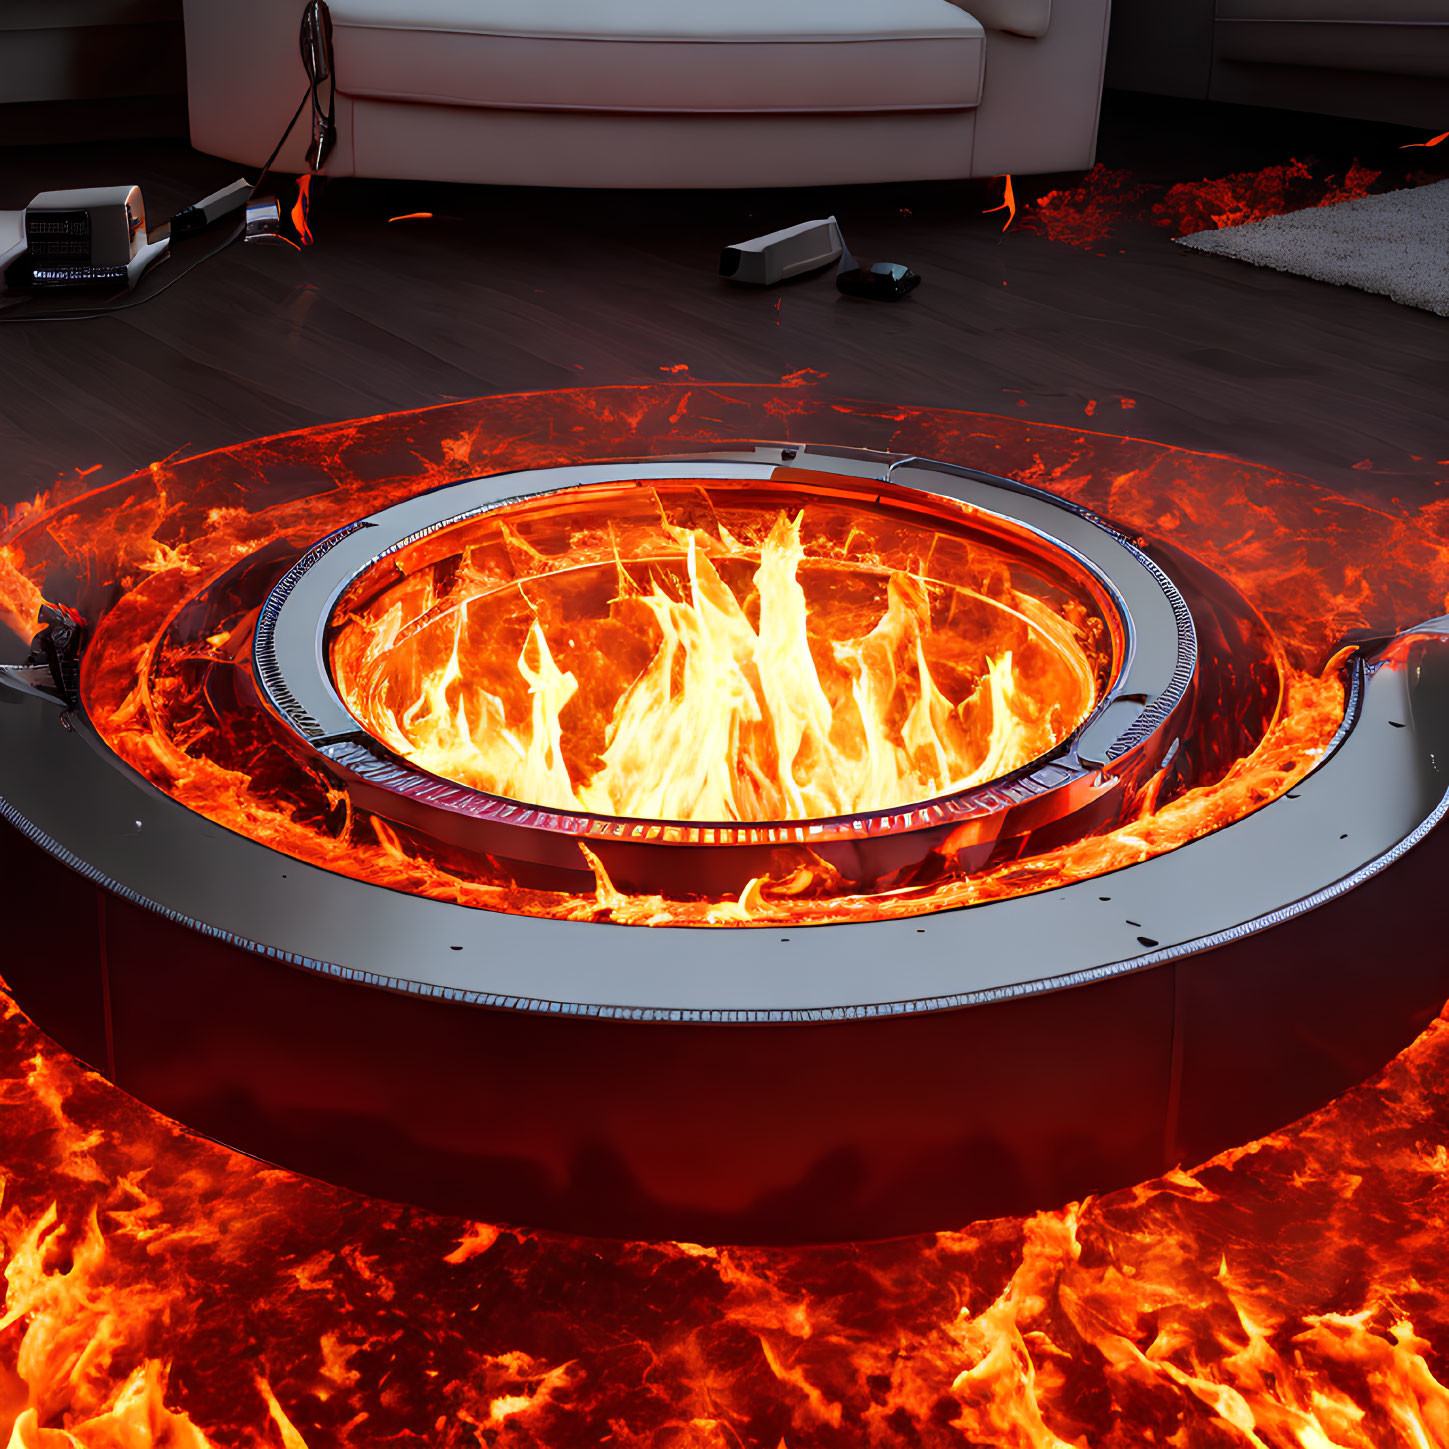 Circular futuristic fireplace in modern room with lava moat and dancing flames